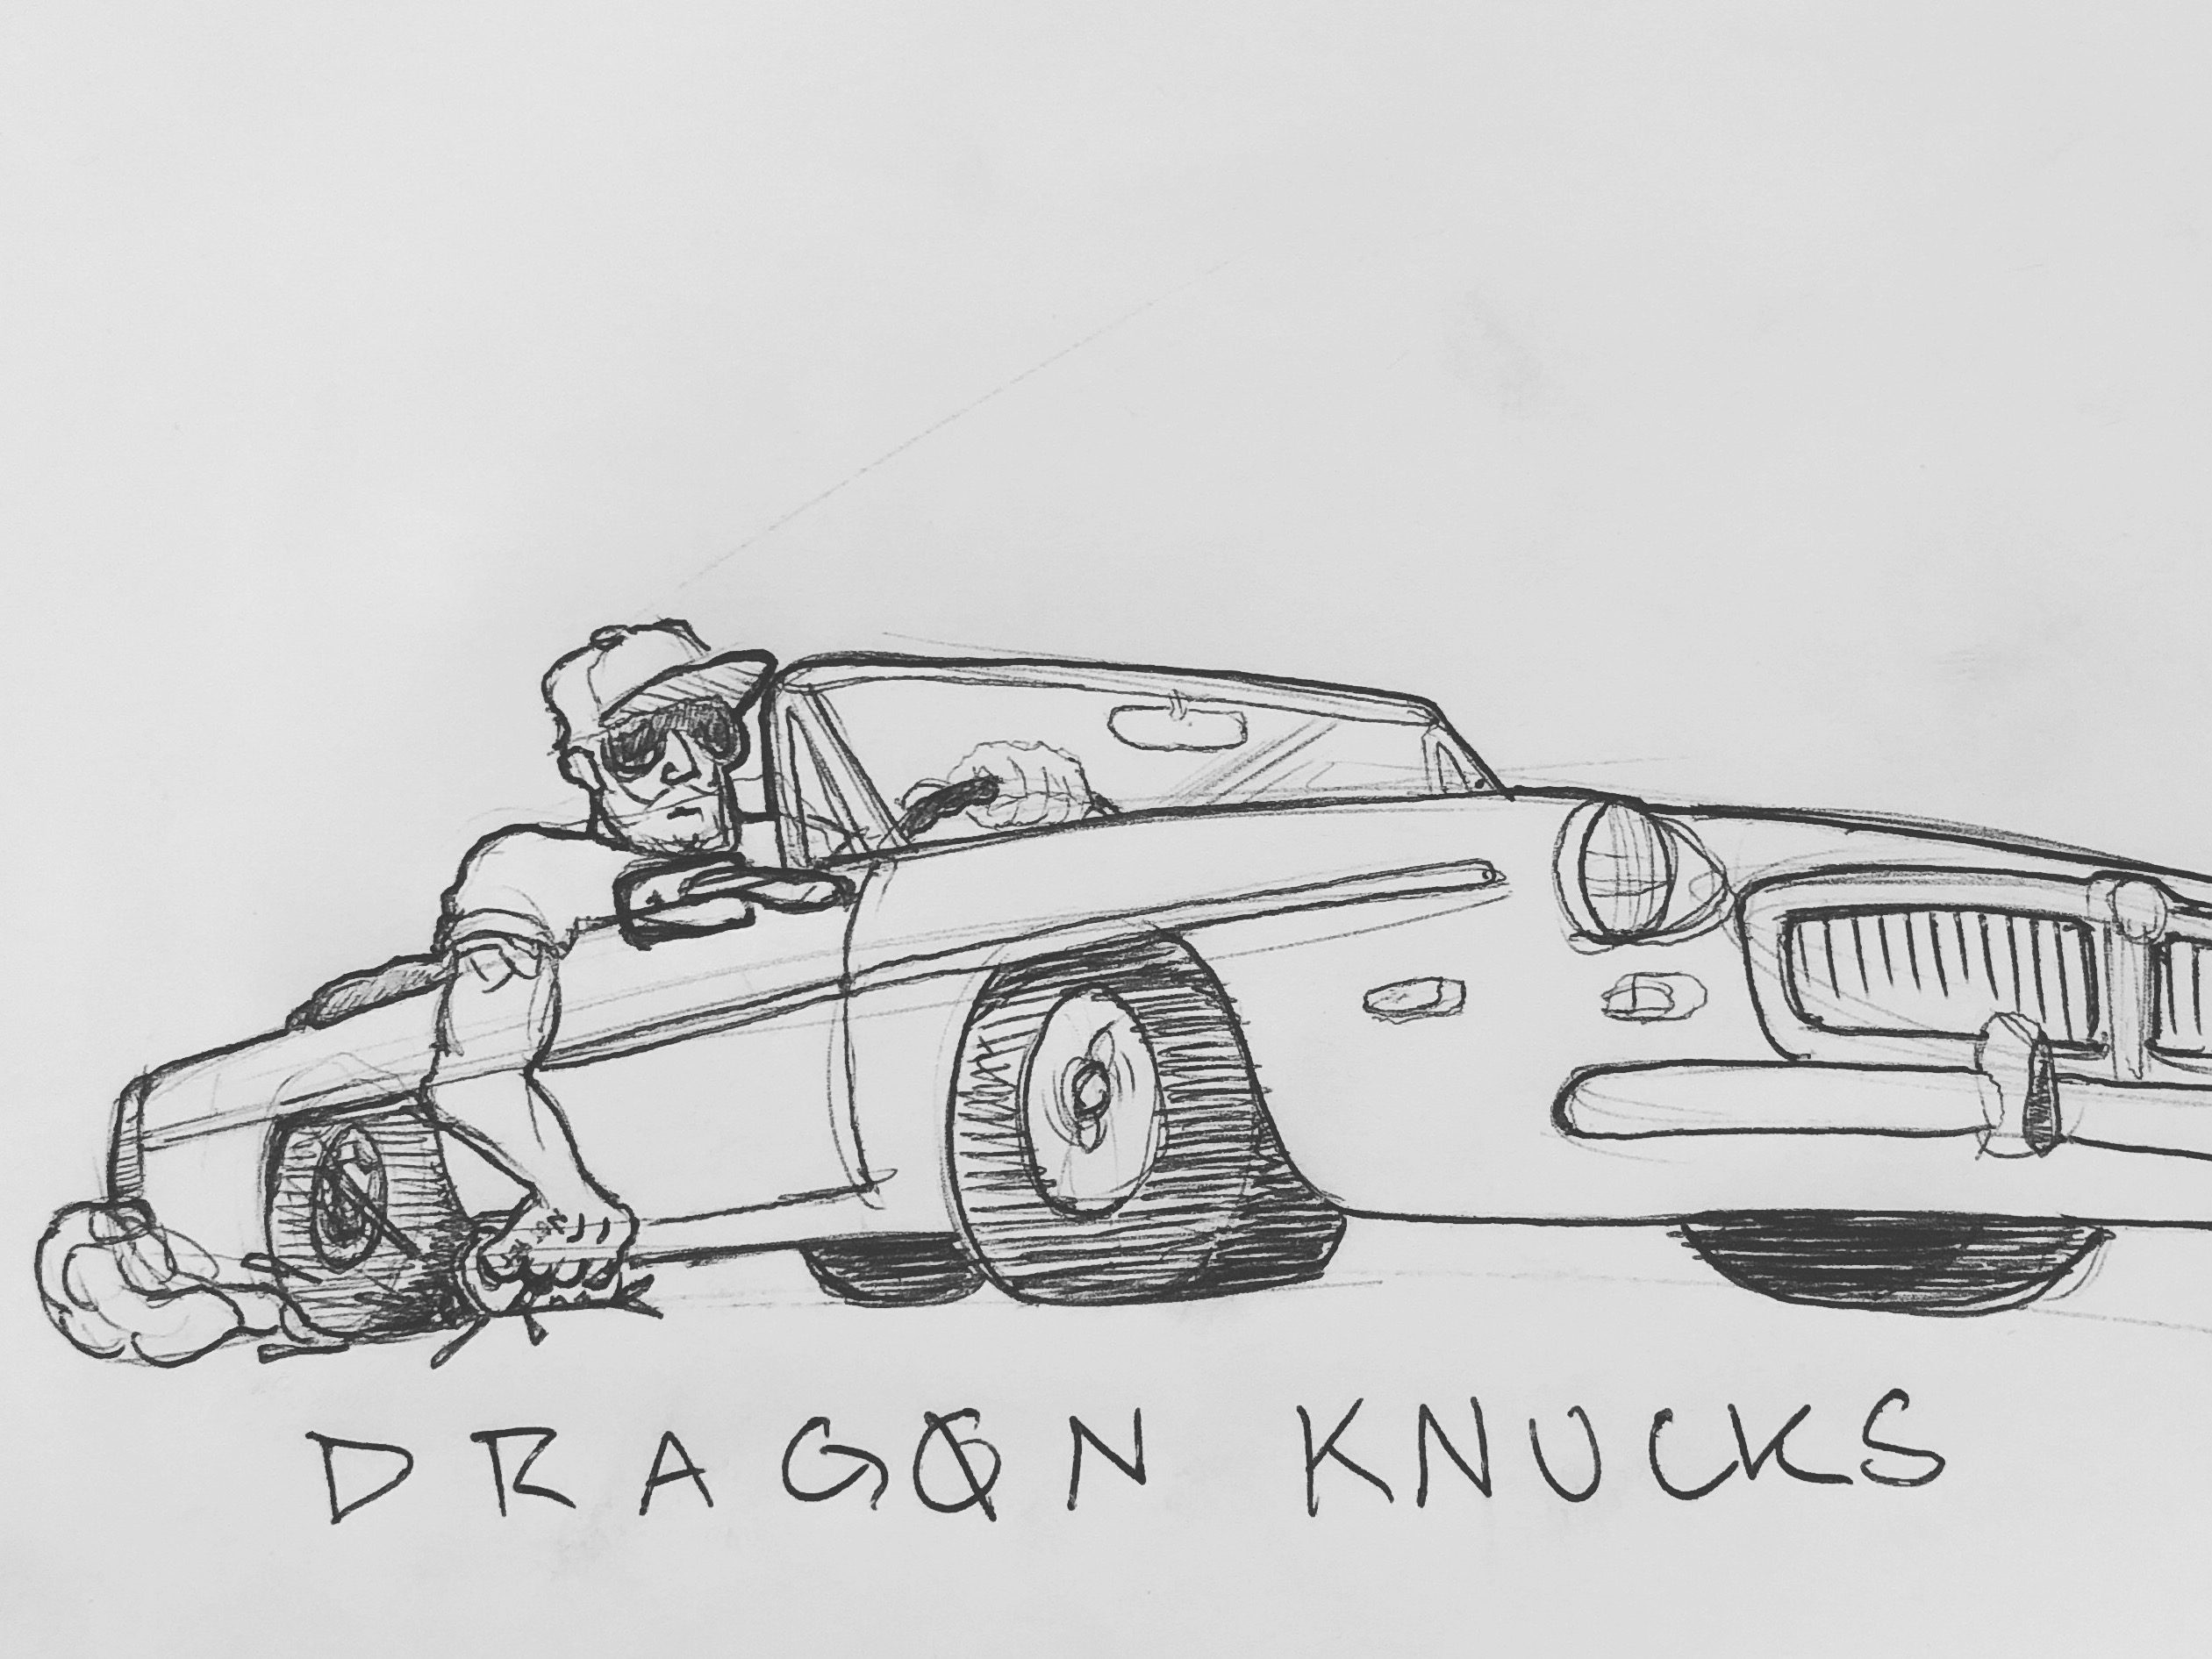  self portrait of me in my first car dragging magnesium knuckles on the ground to make sparks. I would often grab the front of the rear wheel well while driving and often thought I might knick my knuckles on the road if I weren't careful. The car was unmodified